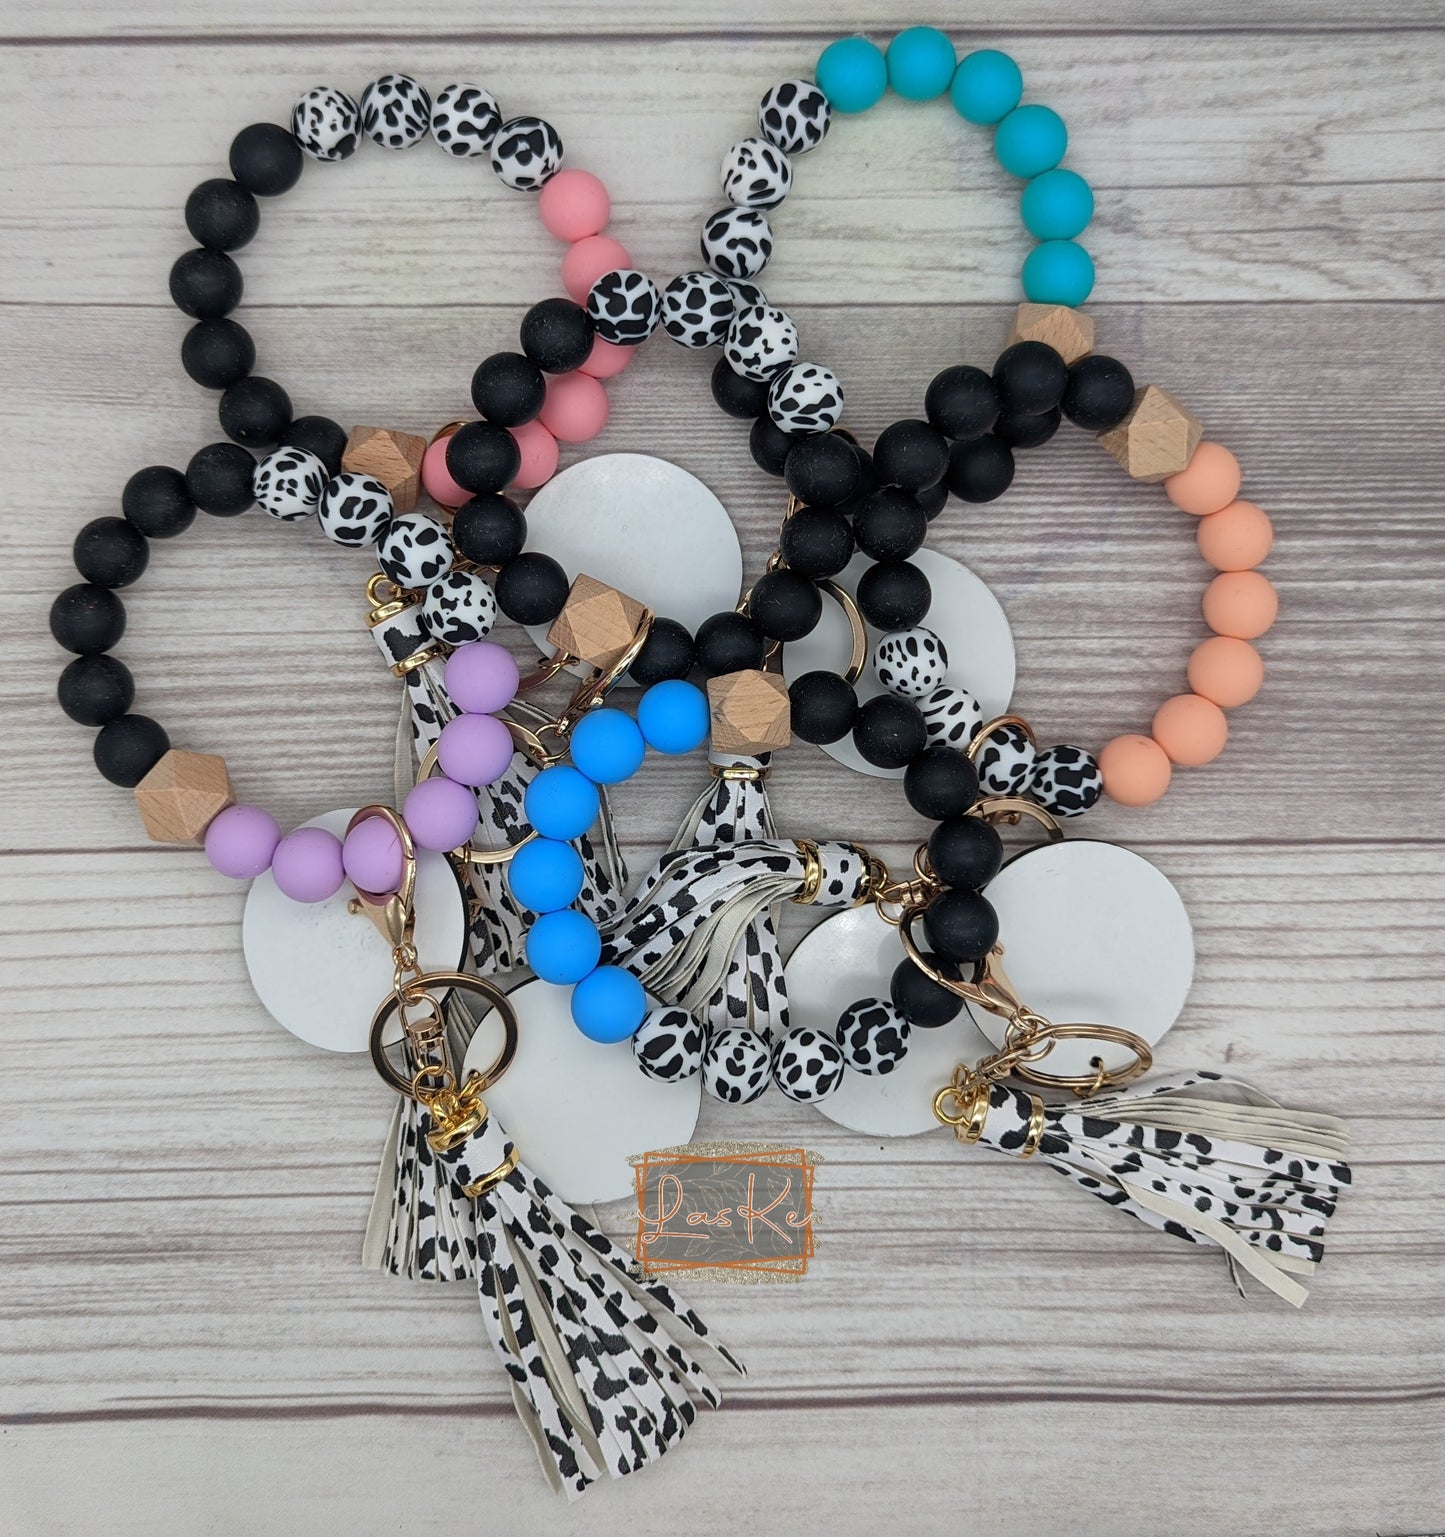 Black Cowprint and Color Keychain Bracelet with MDF Sub Disk